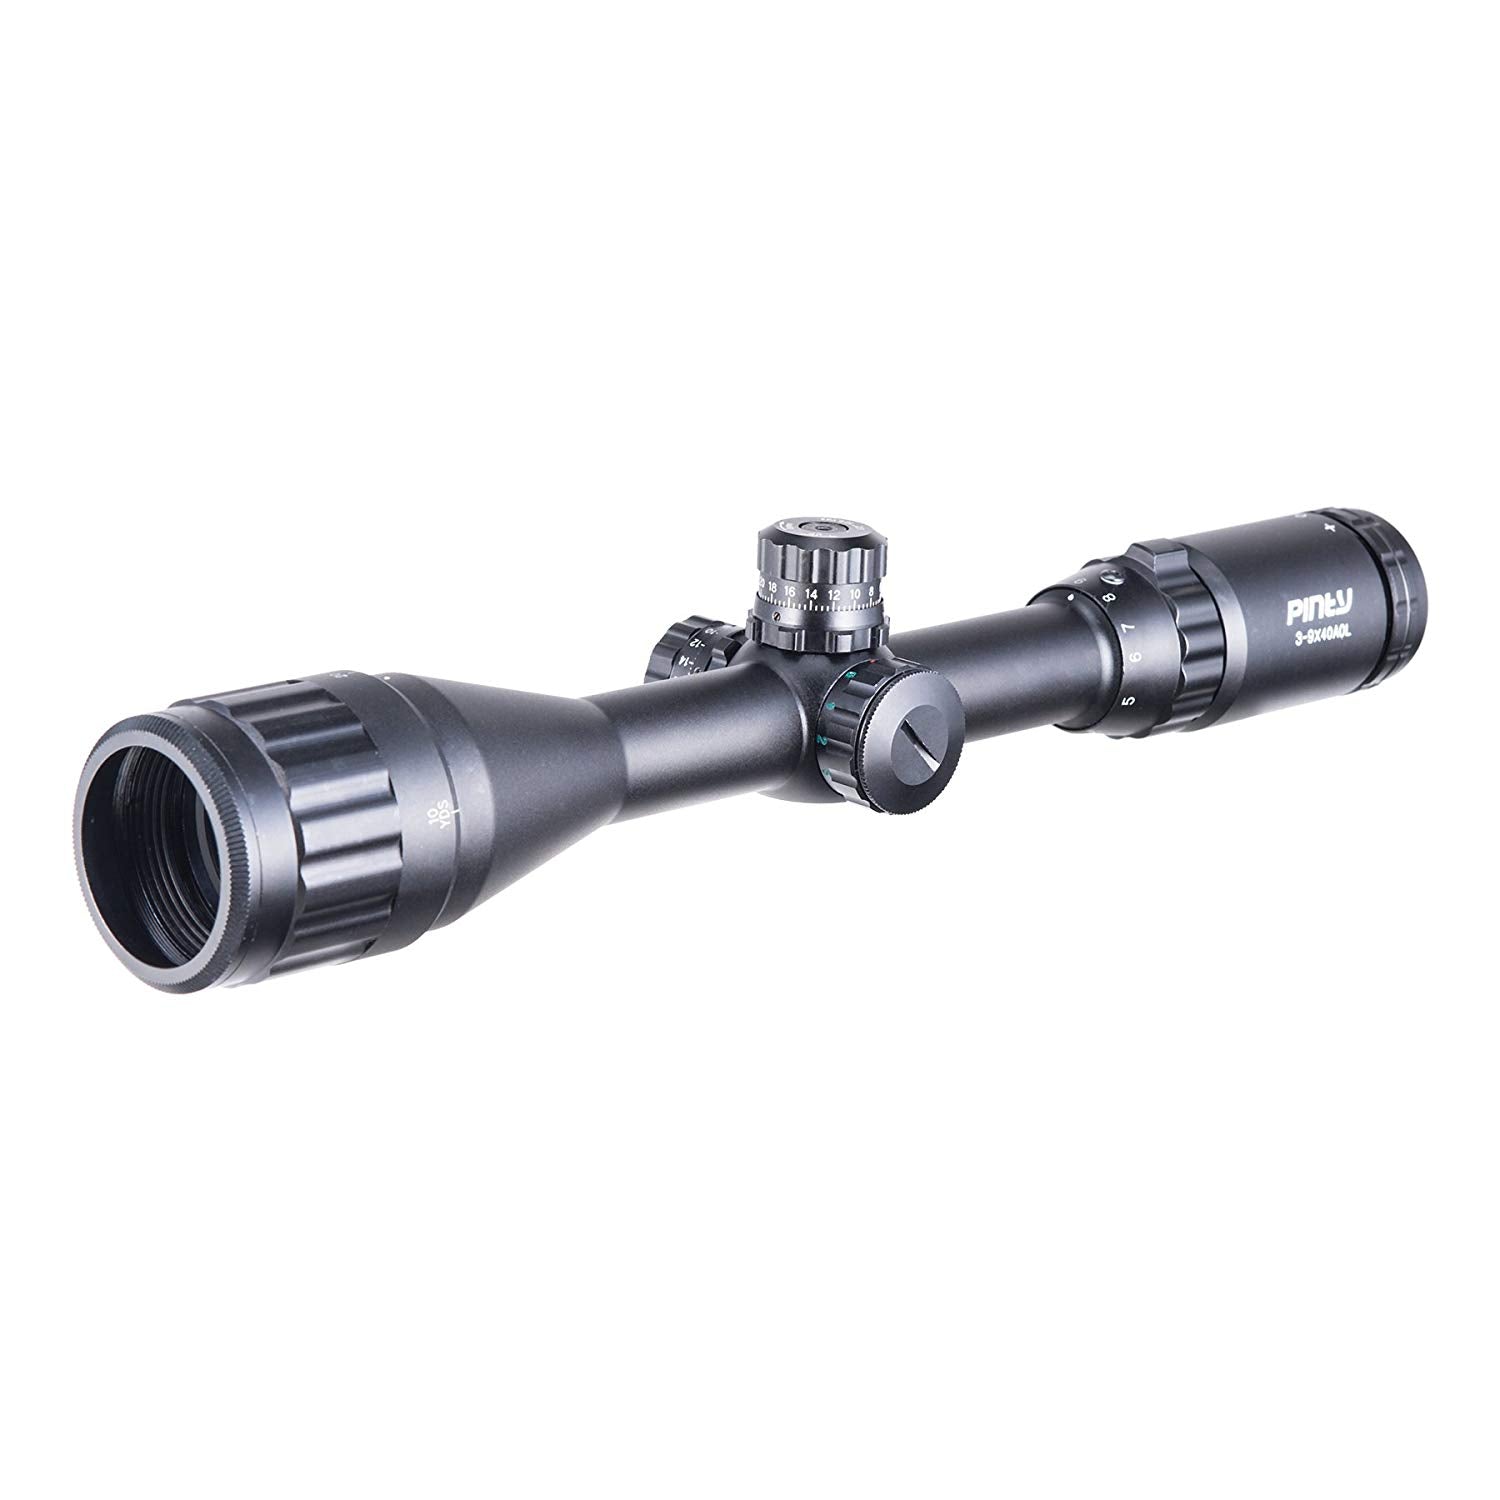 Pinty 3-9X40mm Red/Green/Blue Rifle Scope